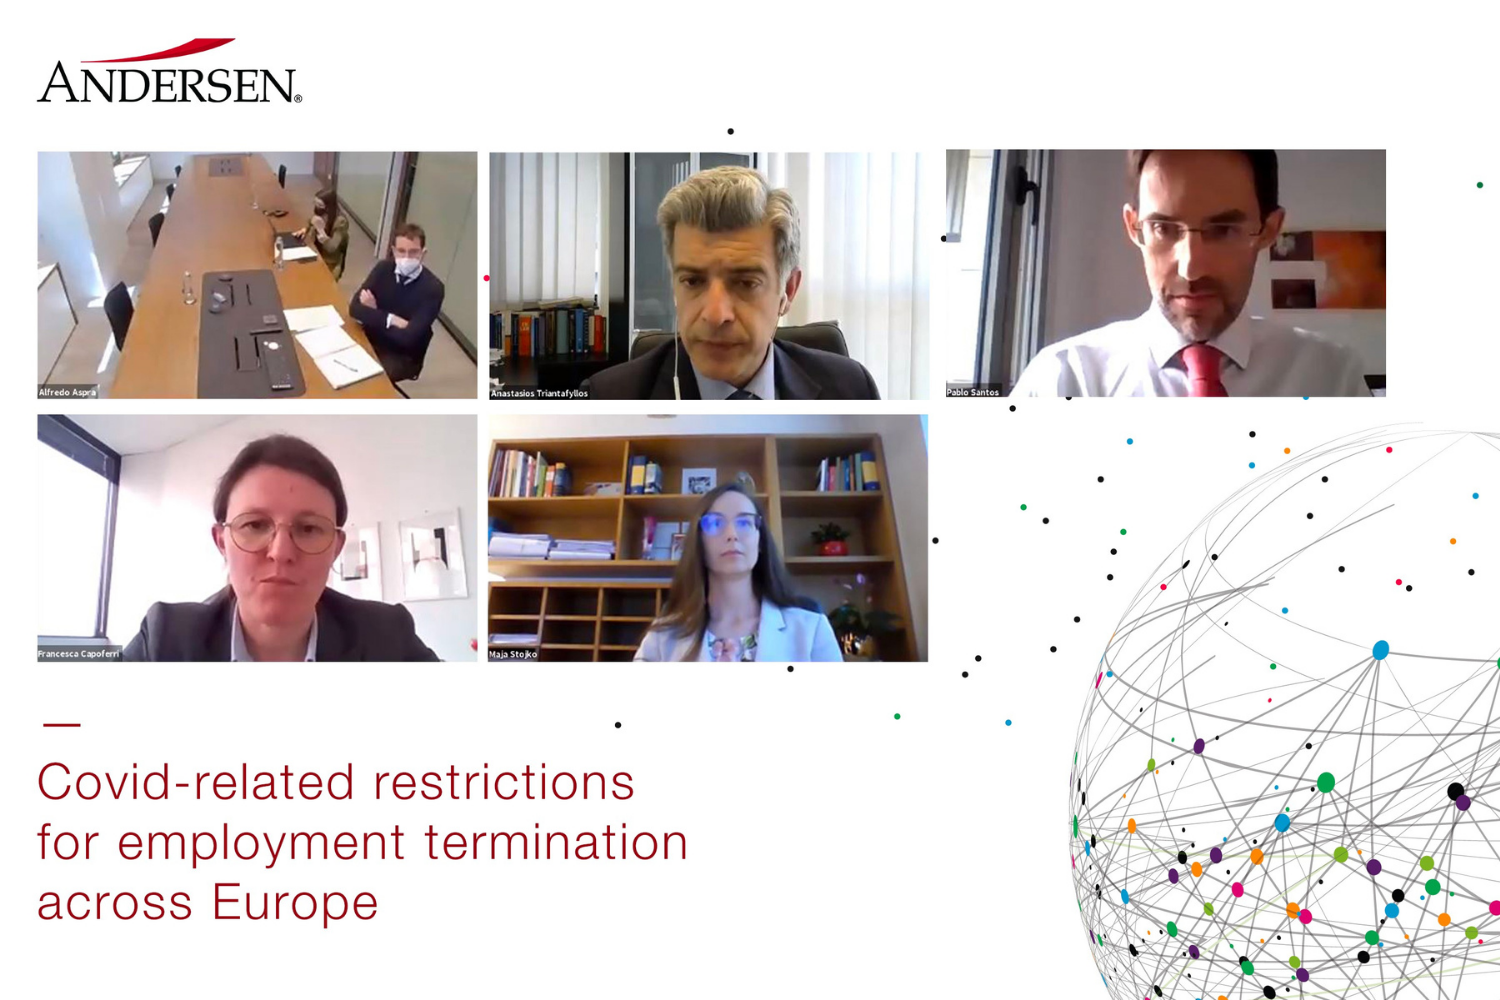 EMPLOYMENT WEBINAR | Covid-related restrictions for employment termination across Europe